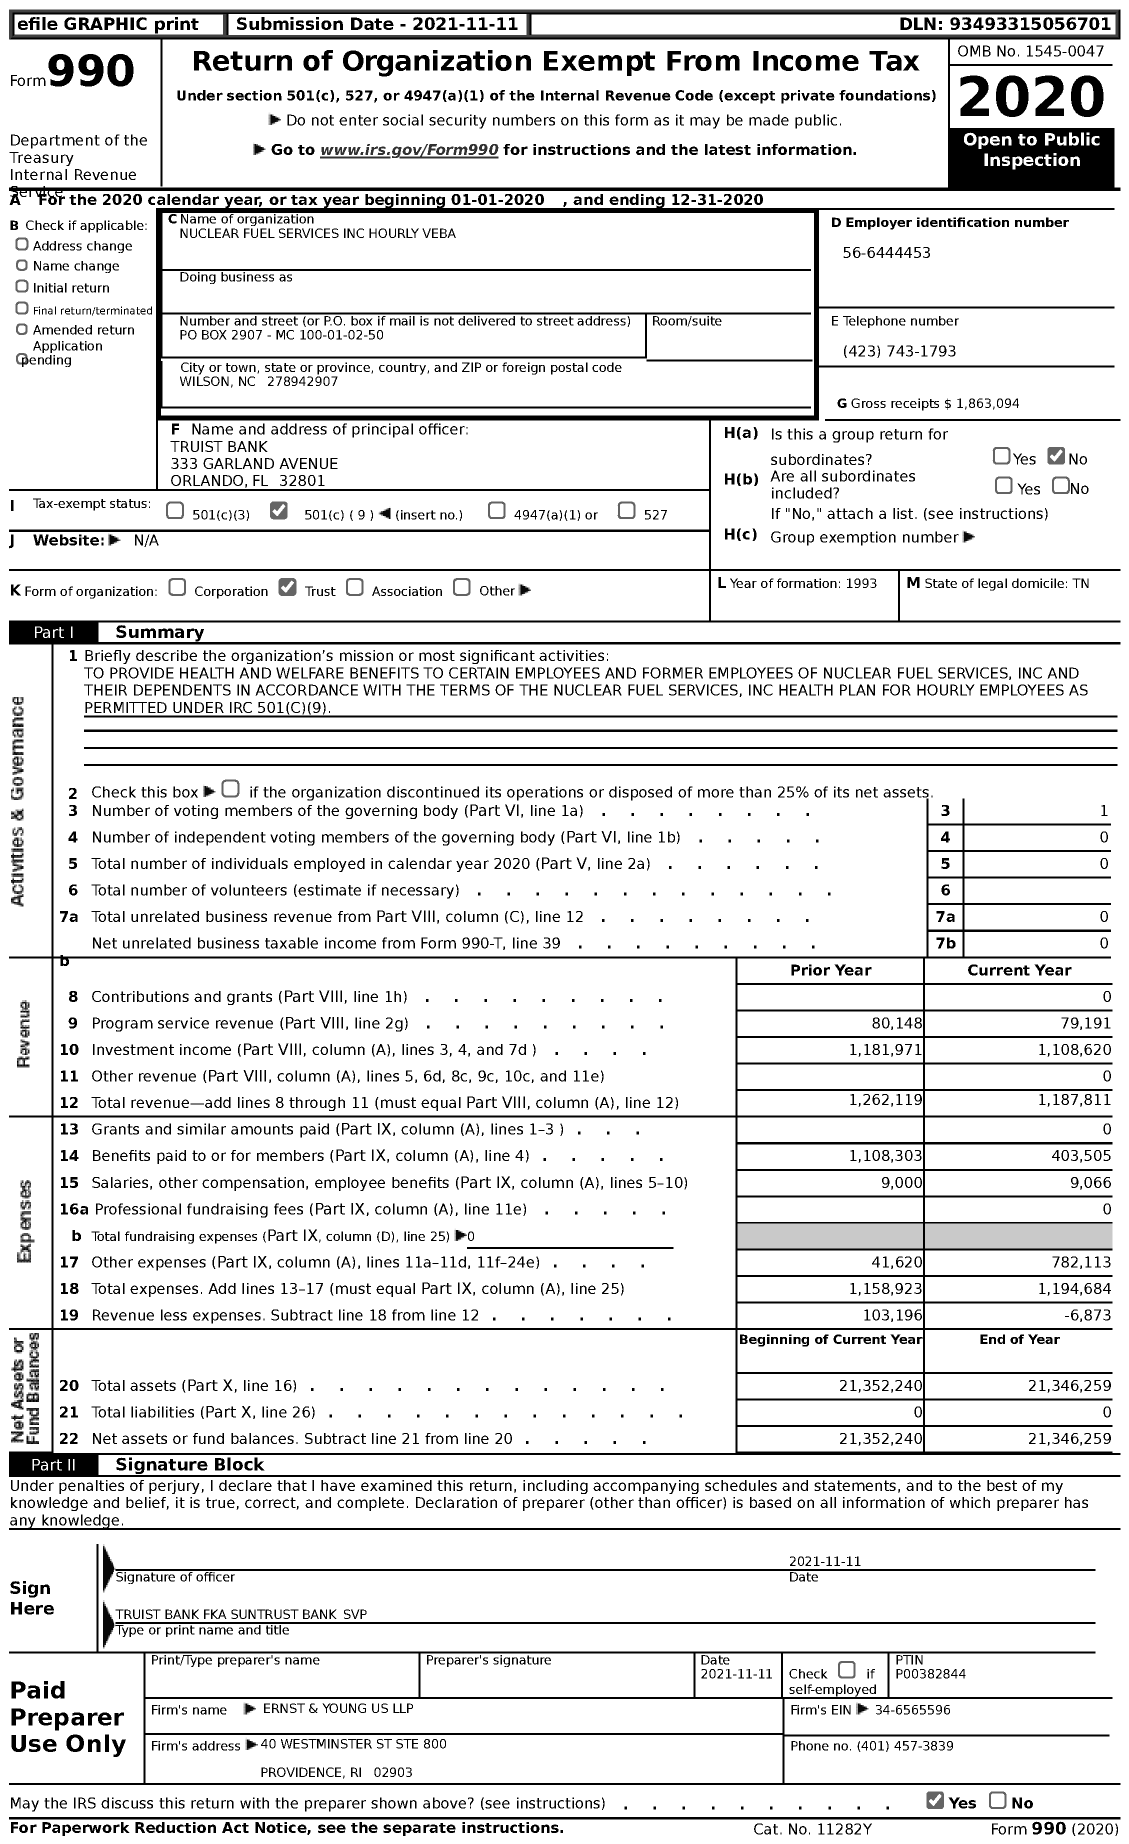 Image of first page of 2020 Form 990 for Nuclear Fuel Services Hourly Veba